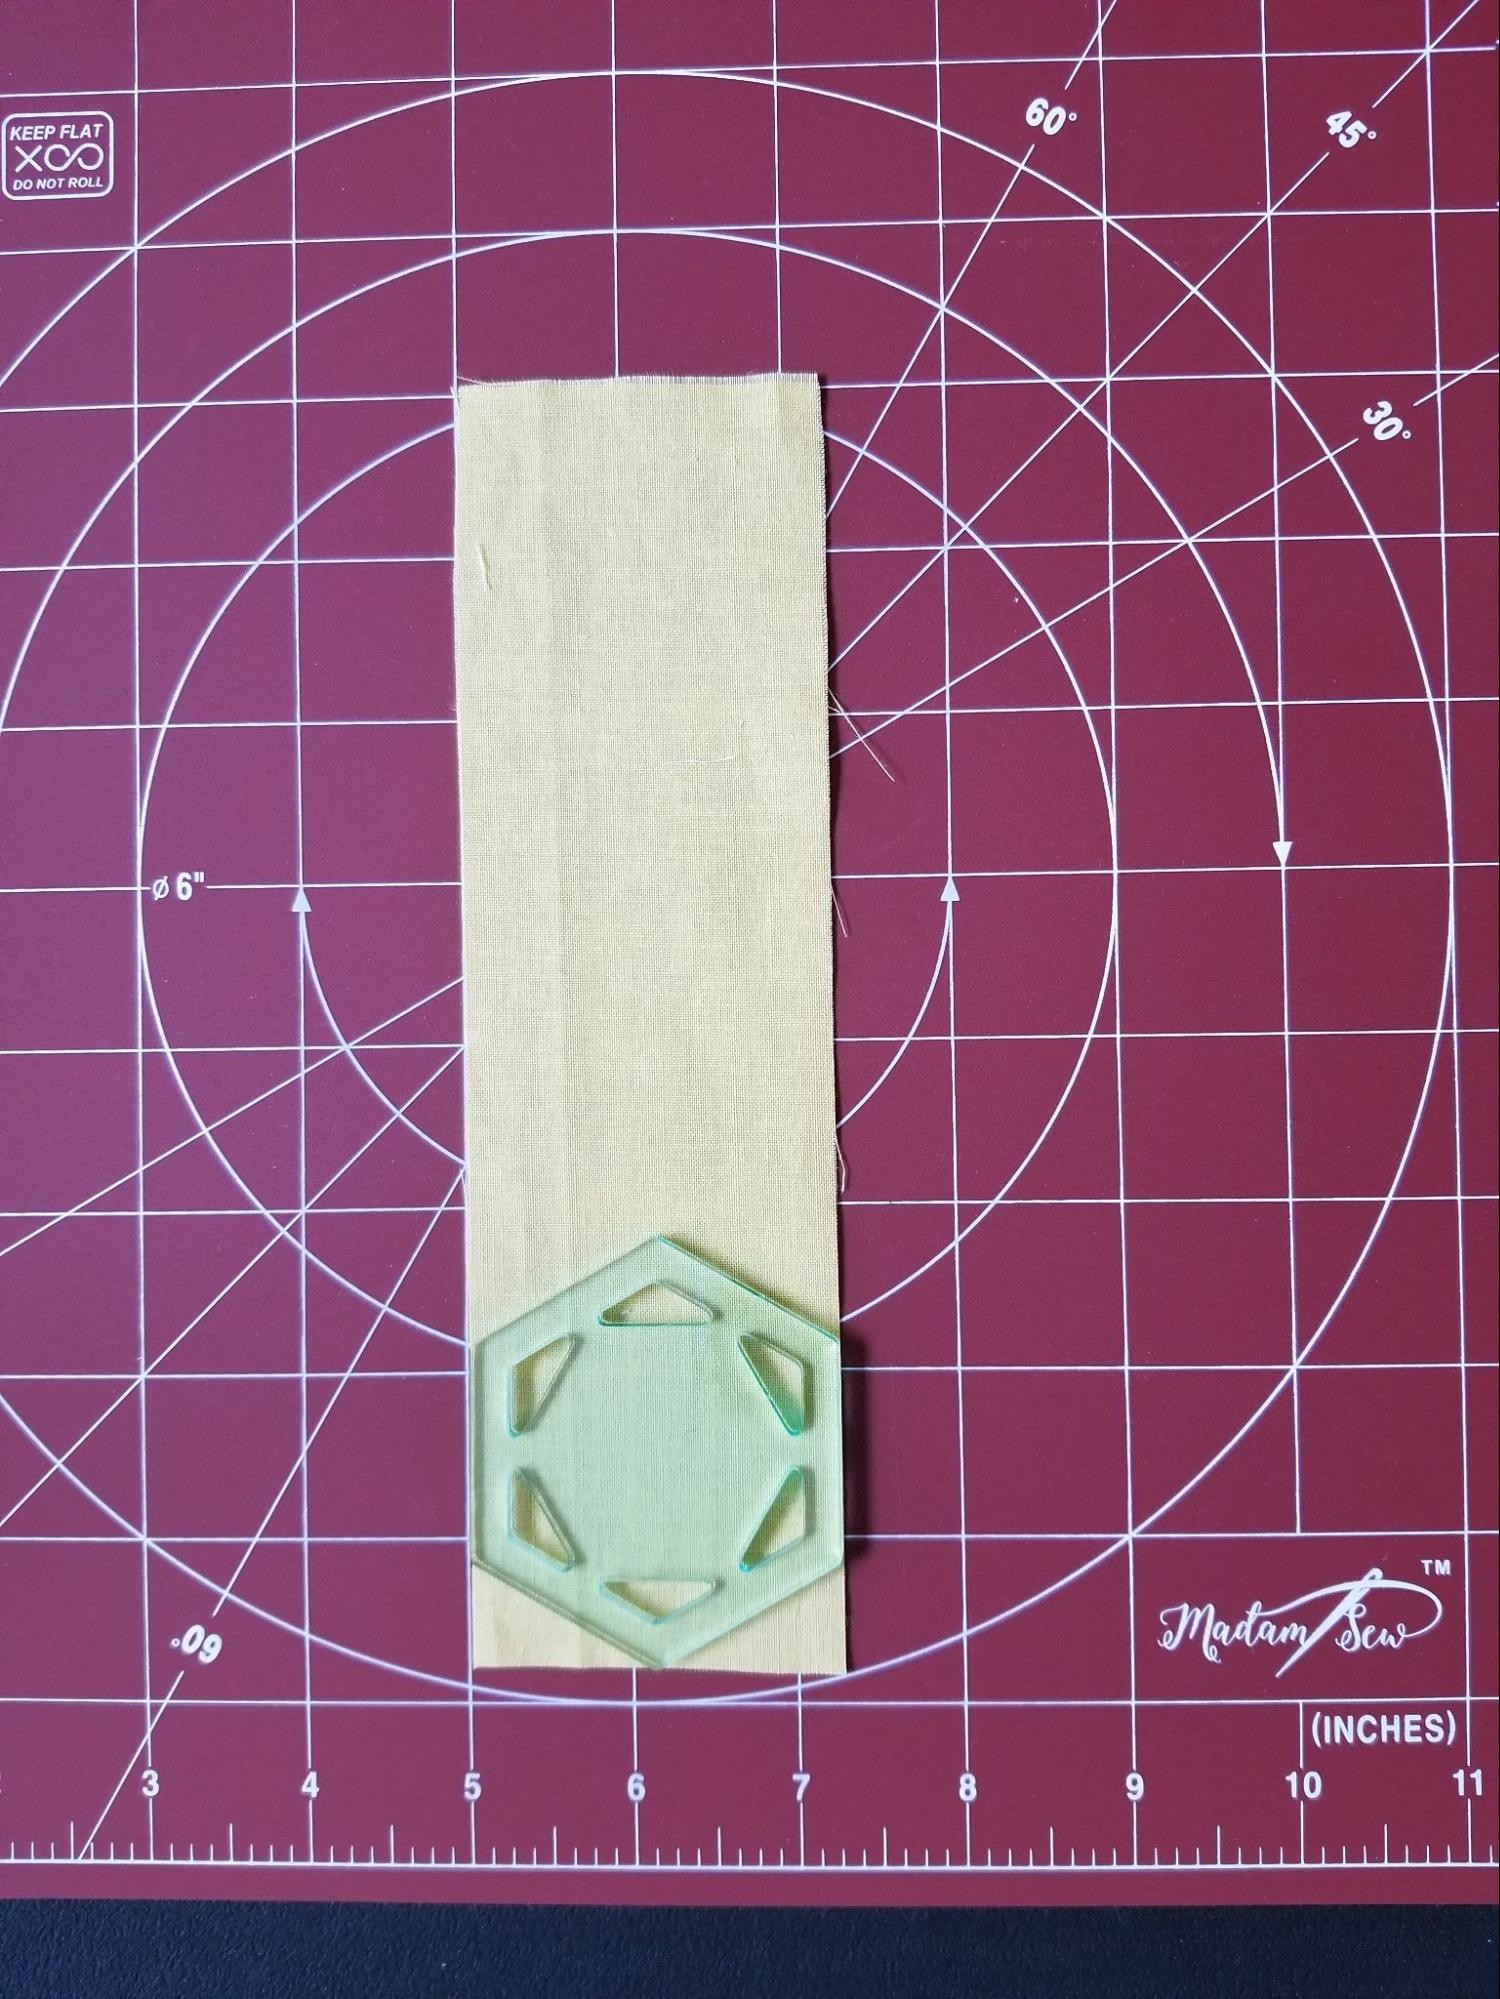 Showing how to align a hexagon quilt template on a fabric strip before cutting.